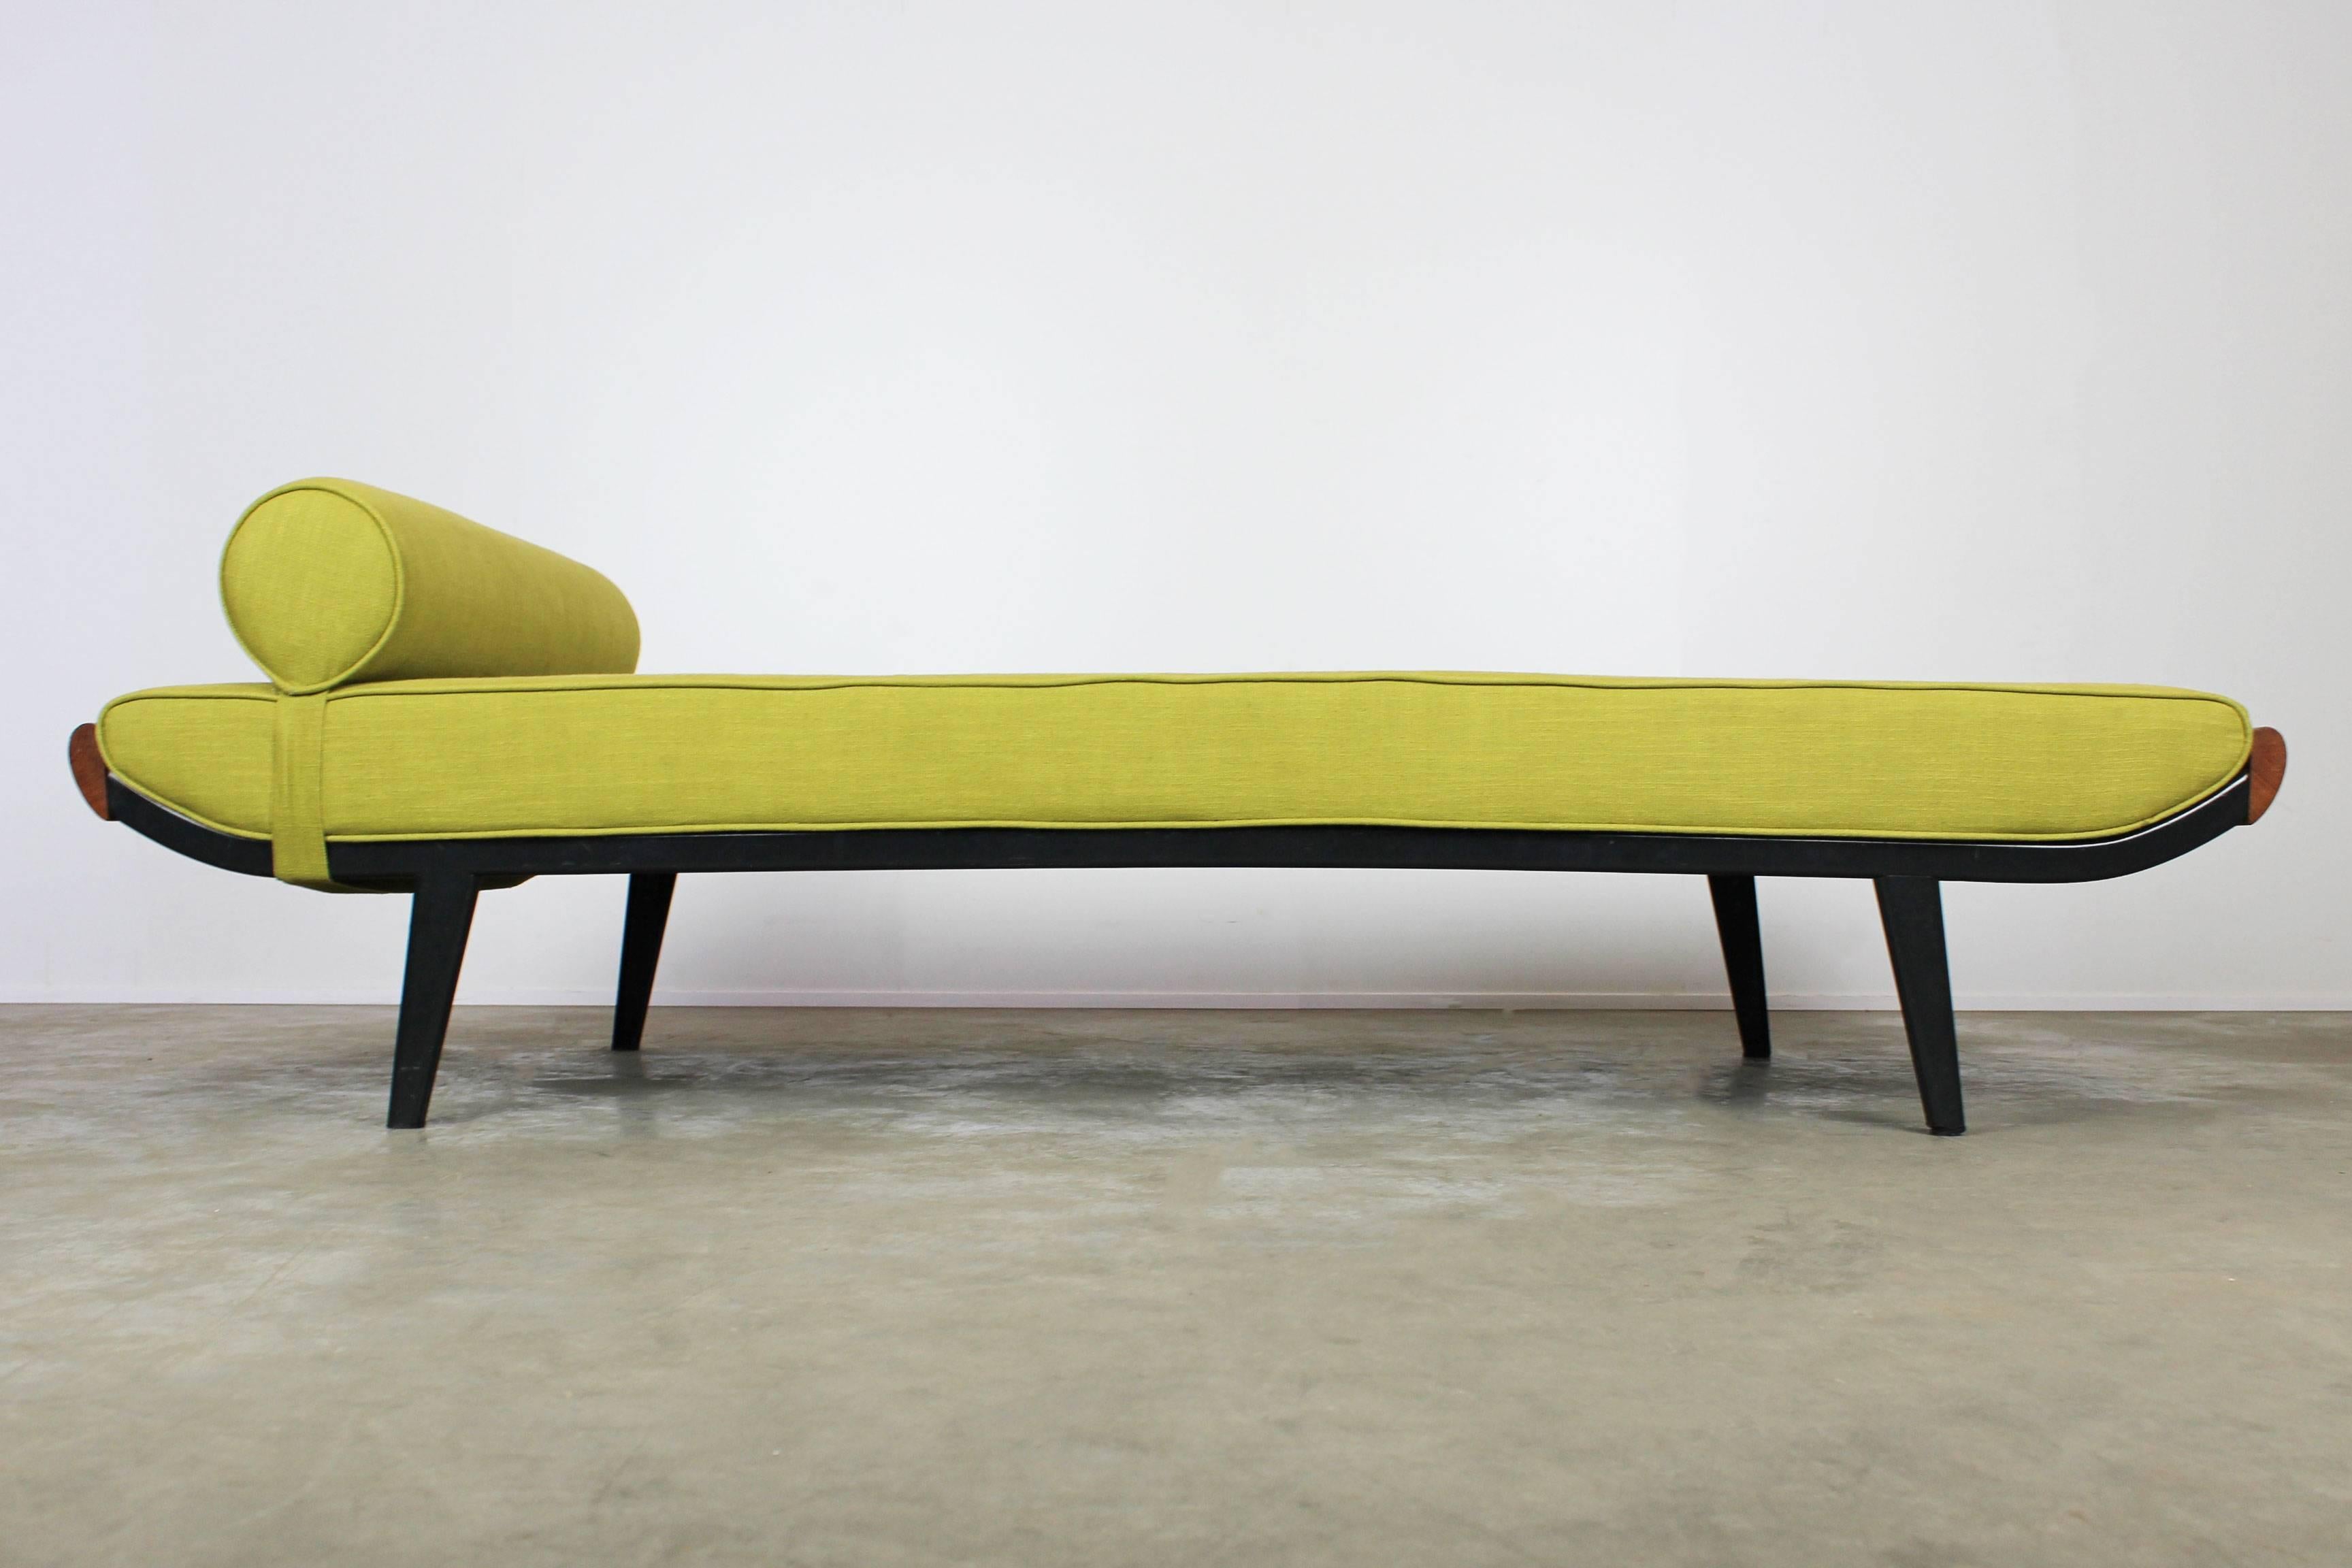 Metal Cleopatra Daybed by Dick Cordemeijer for Auping, 1953, Dutch Design Black Green